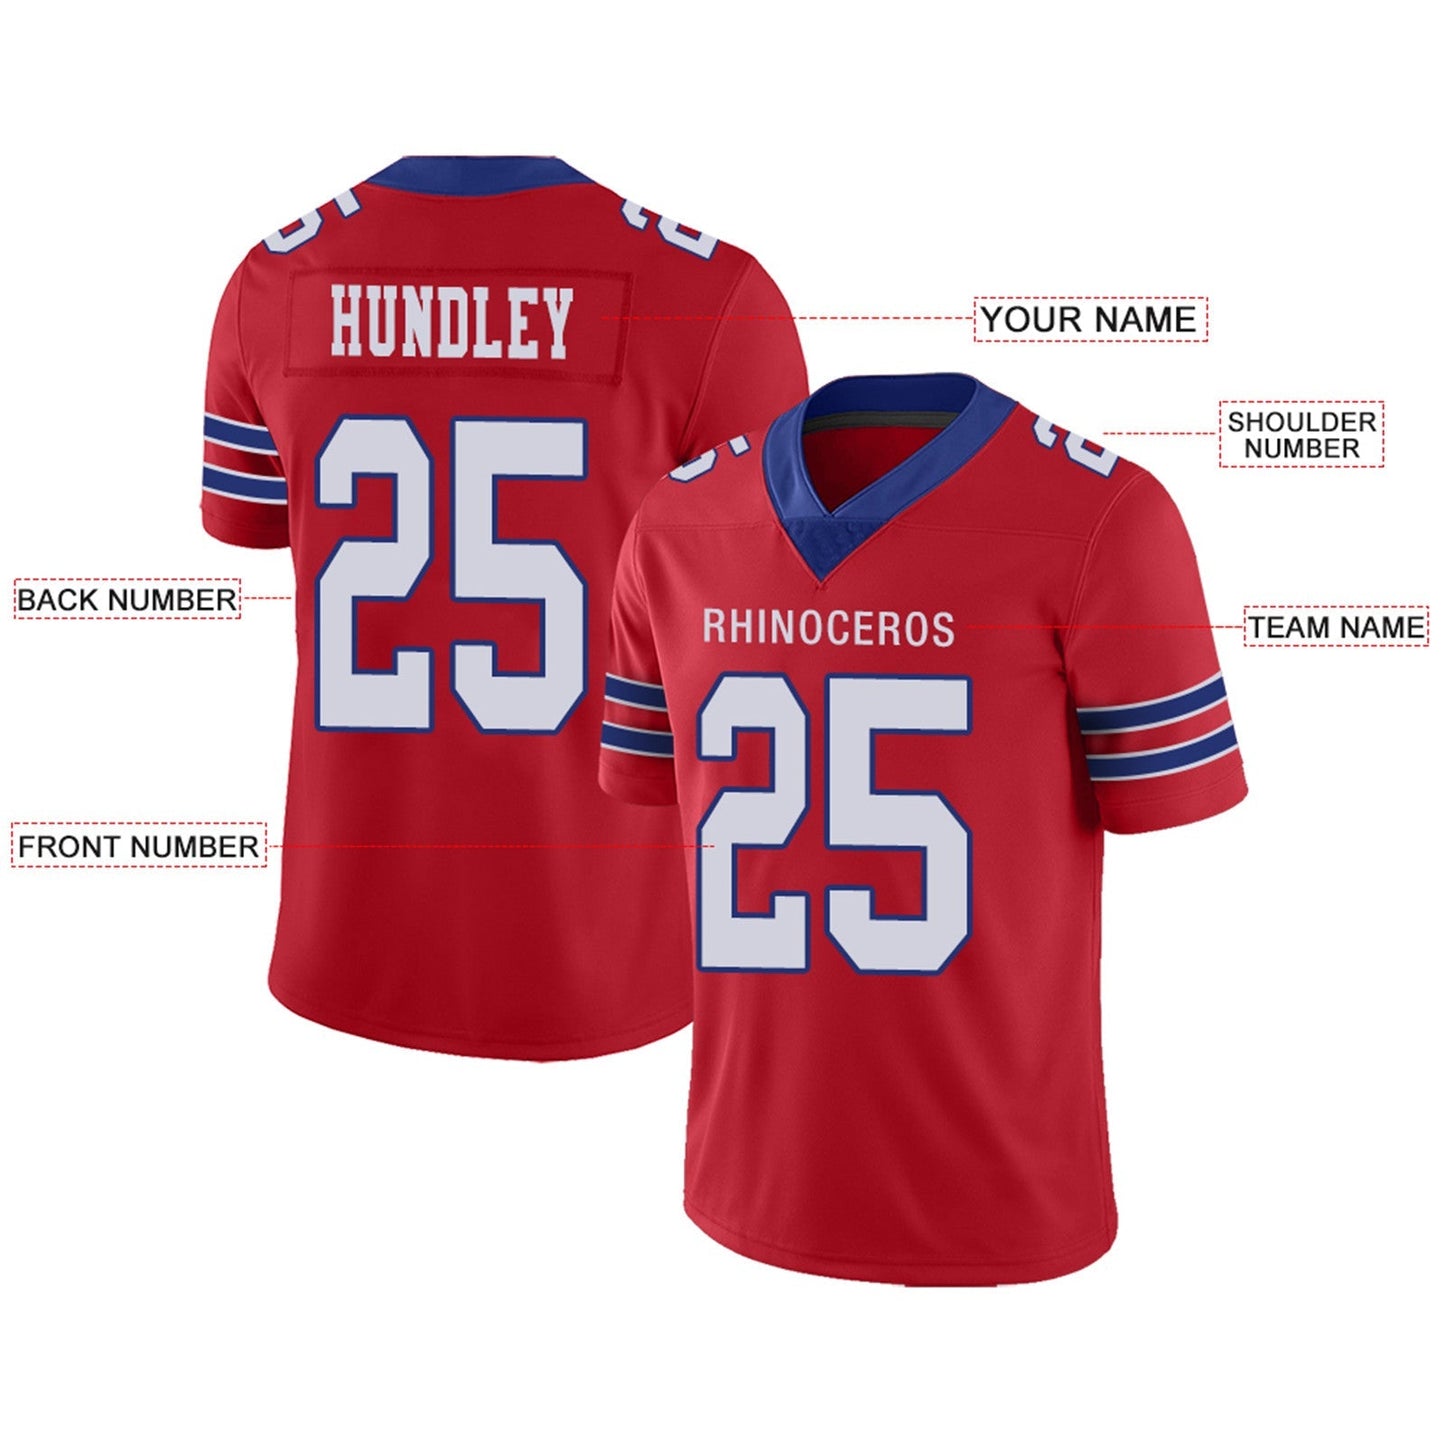 Custom B.Bills Football Jerseys Team Player or Personalized Design Your Own Name for Men's Women's Youth Jerseys Royal